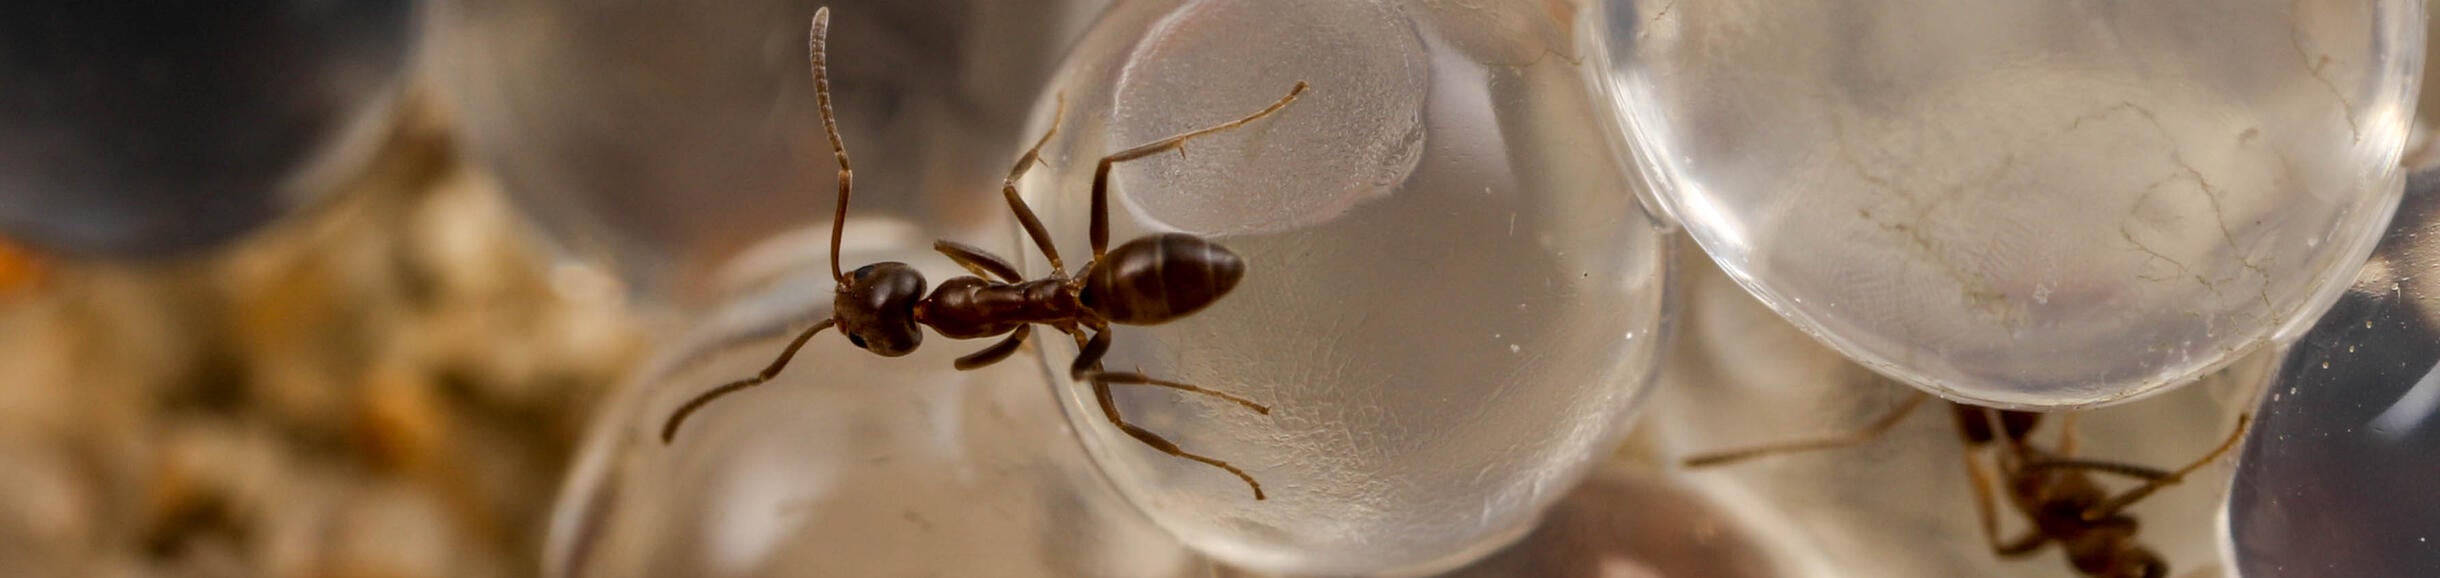 Argentine ant on hydrogel baits